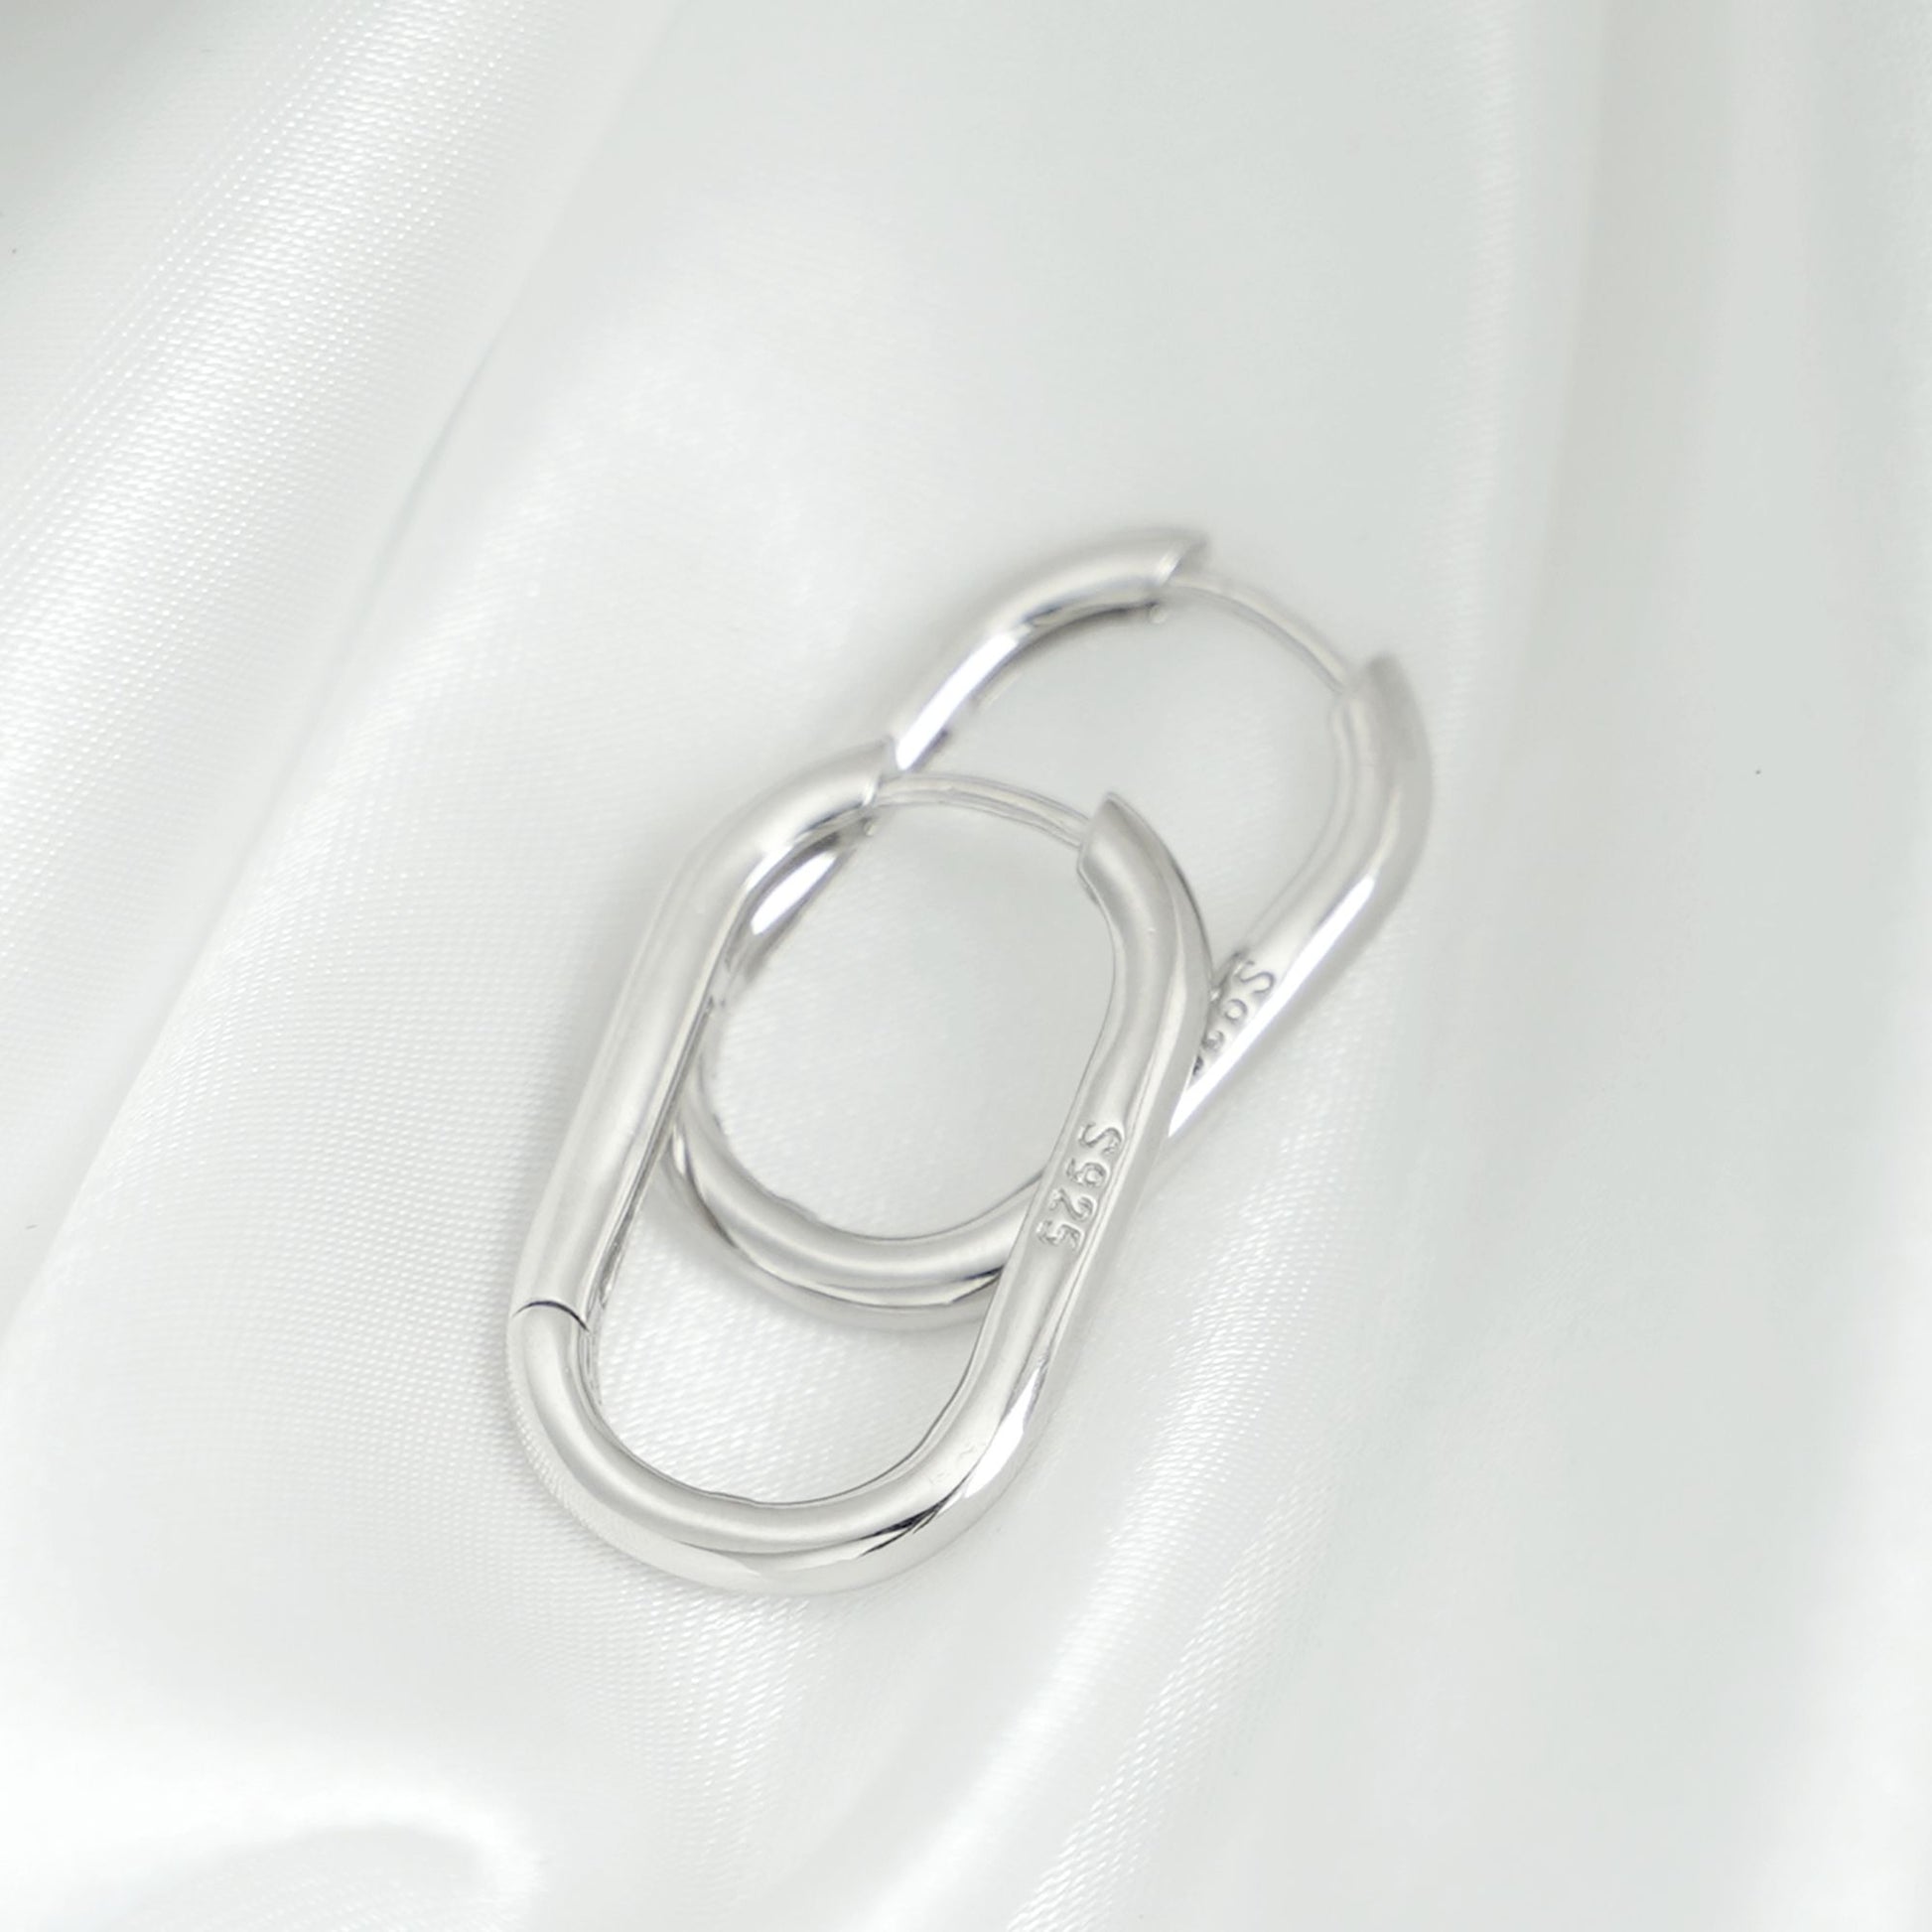 Rhodium-plated Sterling Silver Oval Hoop Earrings with Square Opening - sugarkittenlondon